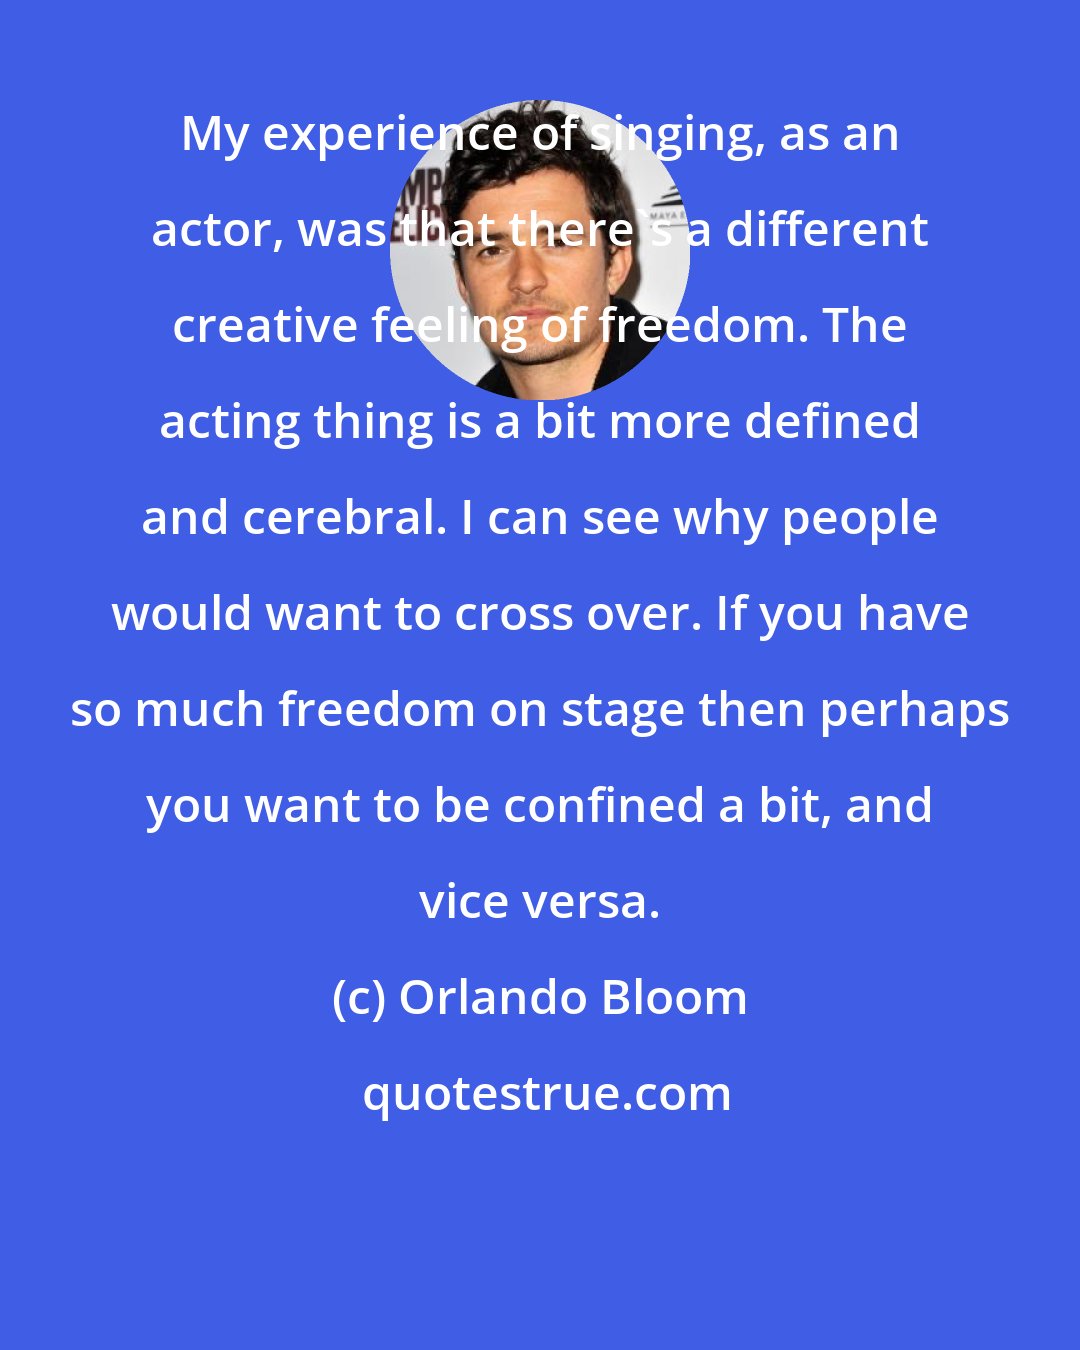 Orlando Bloom: My experience of singing, as an actor, was that there's a different creative feeling of freedom. The acting thing is a bit more defined and cerebral. I can see why people would want to cross over. If you have so much freedom on stage then perhaps you want to be confined a bit, and vice versa.